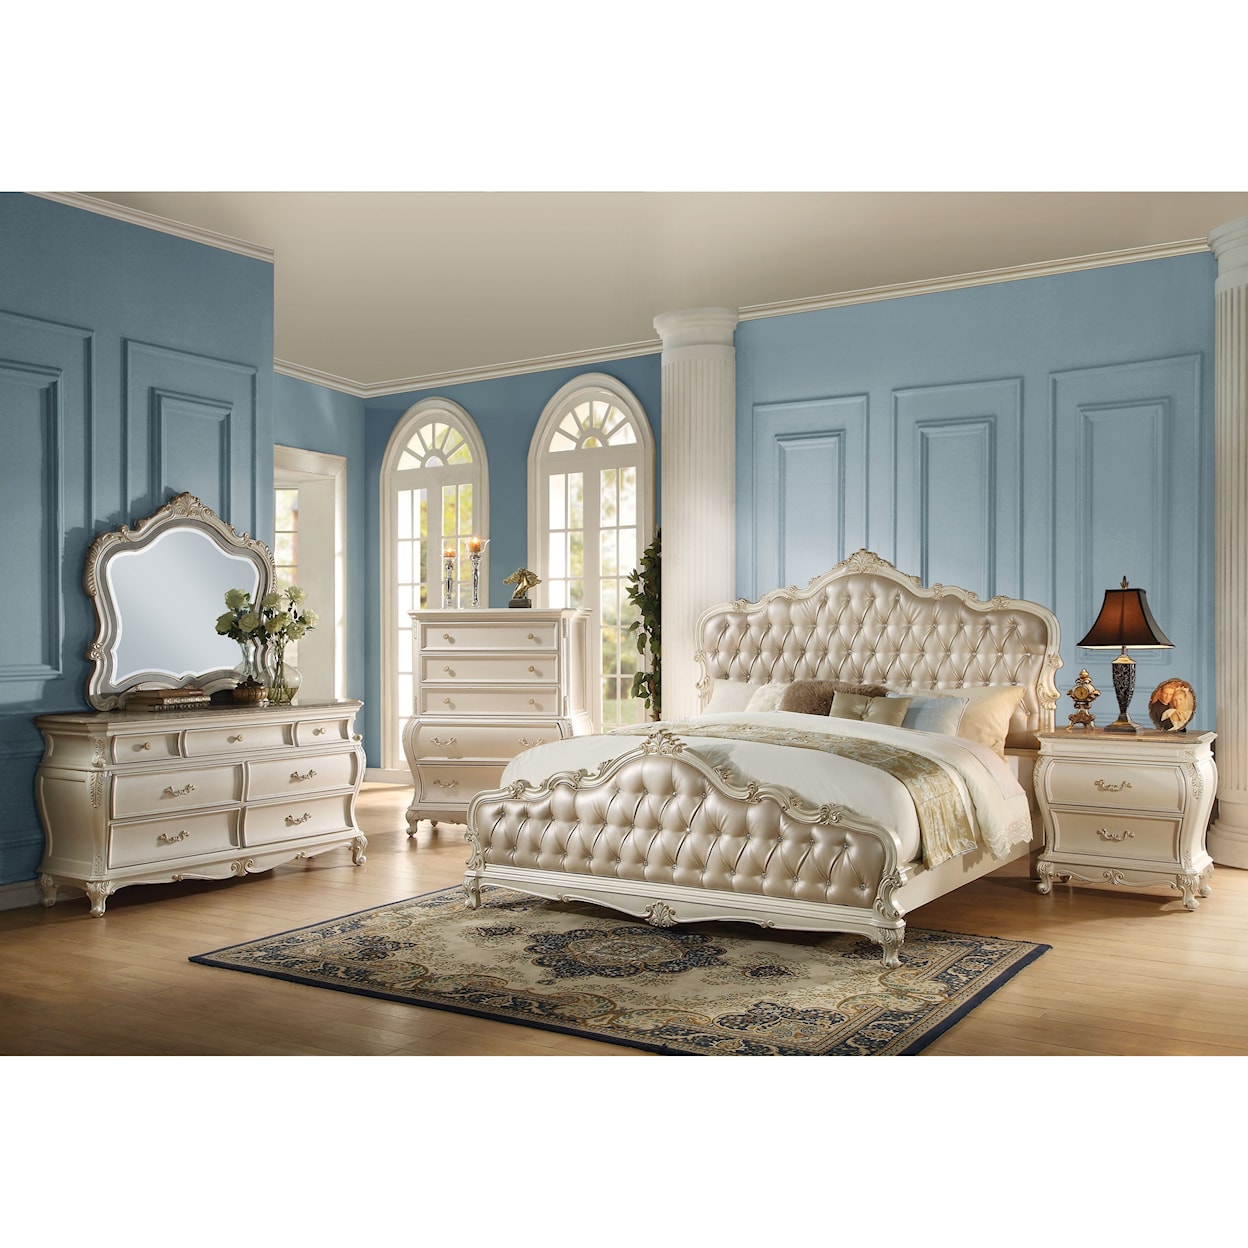 Acme Furniture Chantelle King Bedroom Group